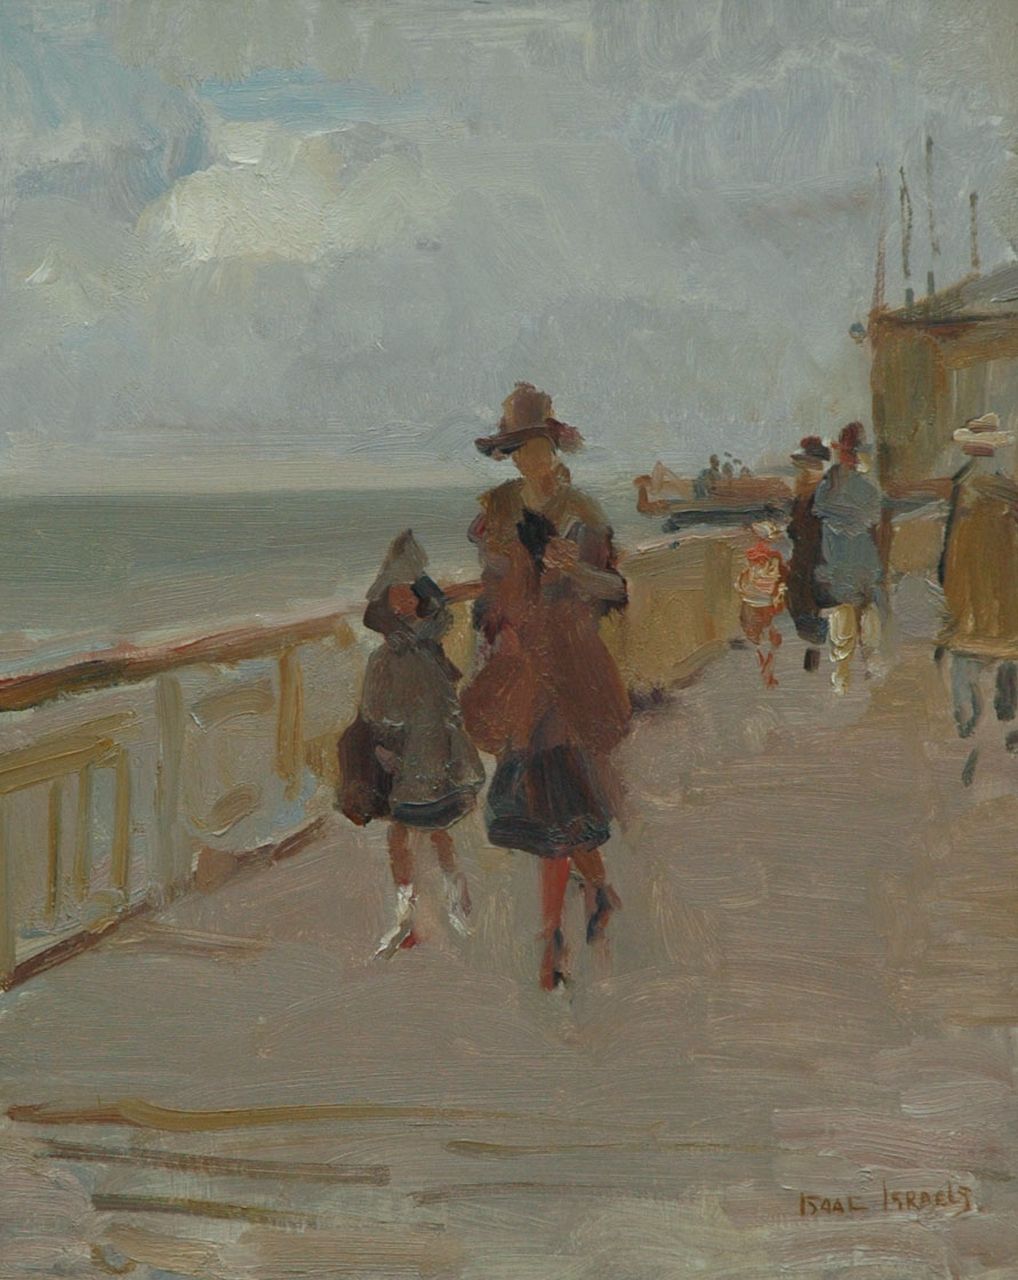 Israels I.L.  | 'Isaac' Lazarus Israels, Parading on the Scheveningen Pier, oil on canvas 50.3 x 40.0 cm, signed l.r.